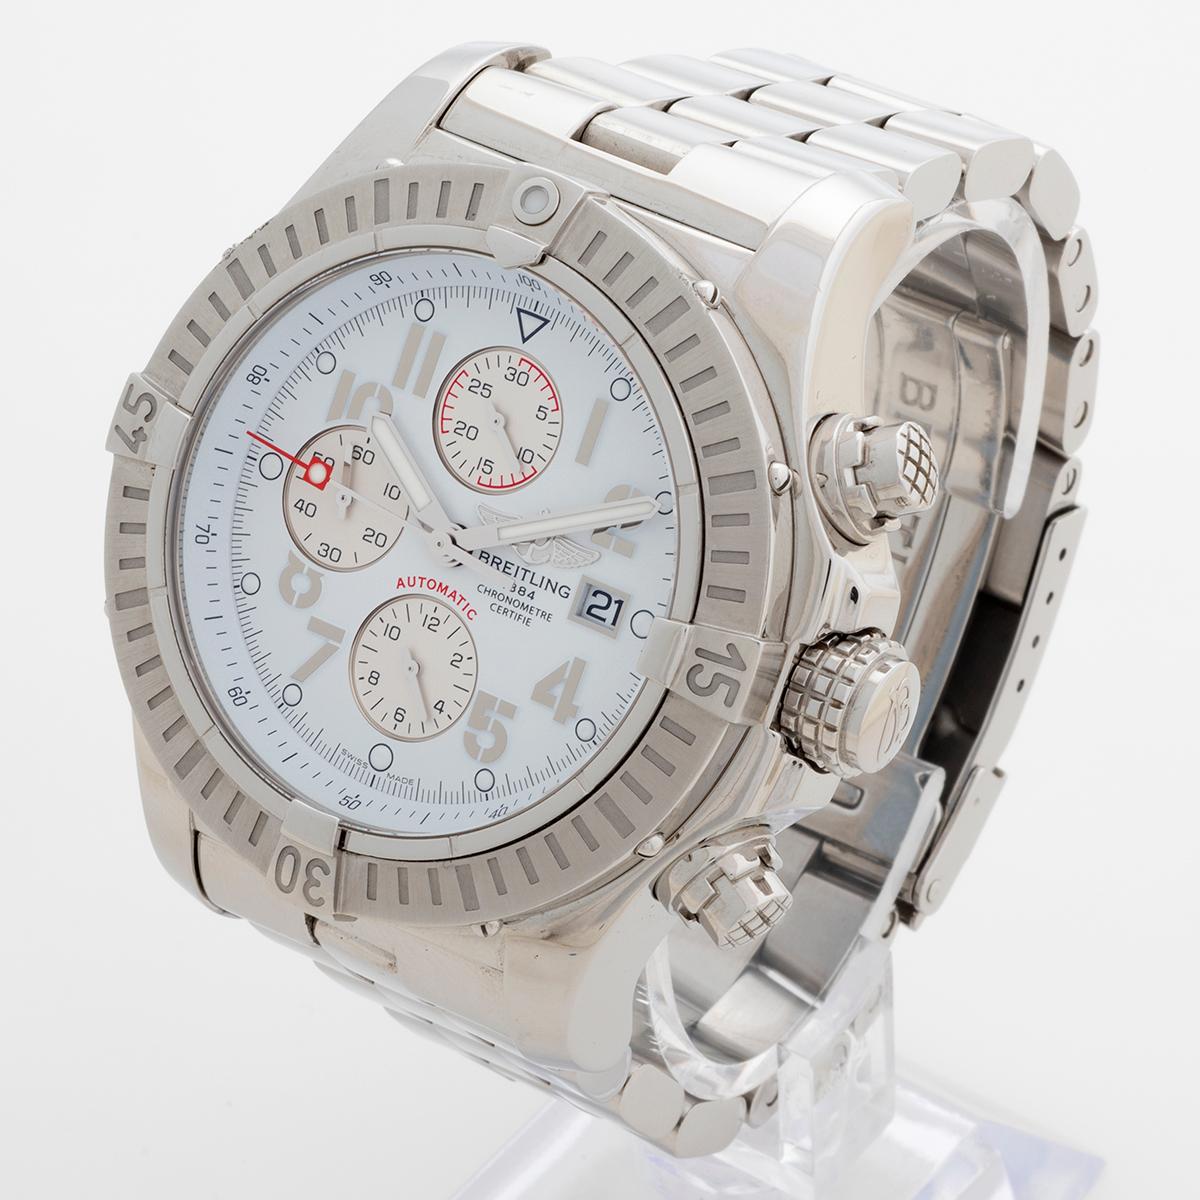 Striking Breitling Super Avenger Chronograph with Date, Ref A1337011 1